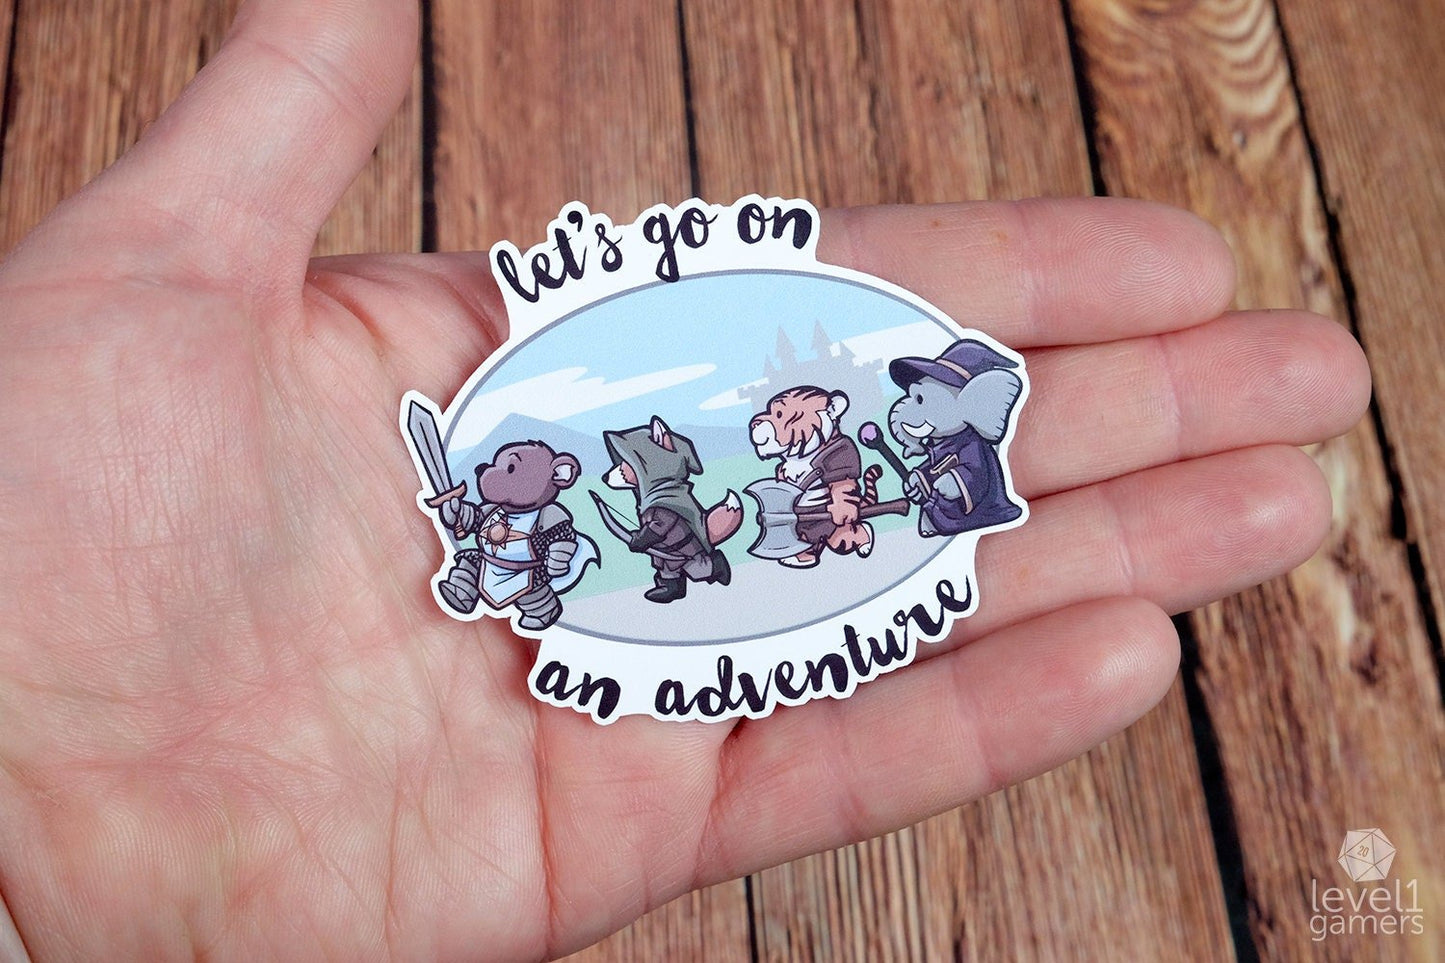 Let's Go On An Adventure Sticker  Level 1 Gamers   